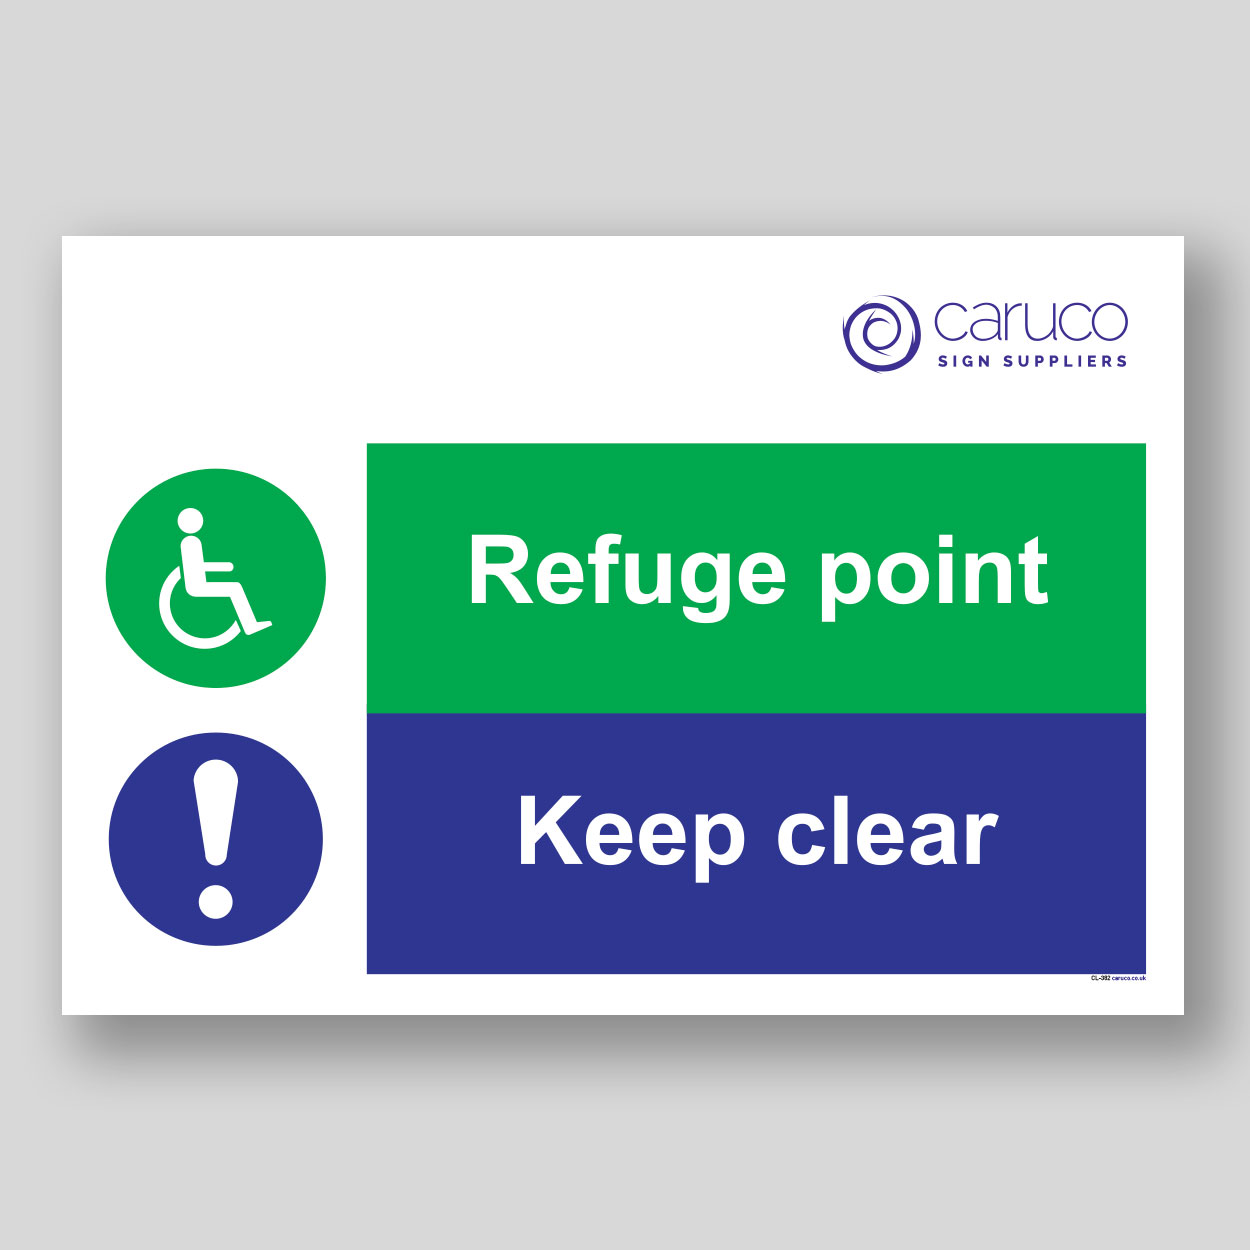 CL-382 Refuge point - Keep clear